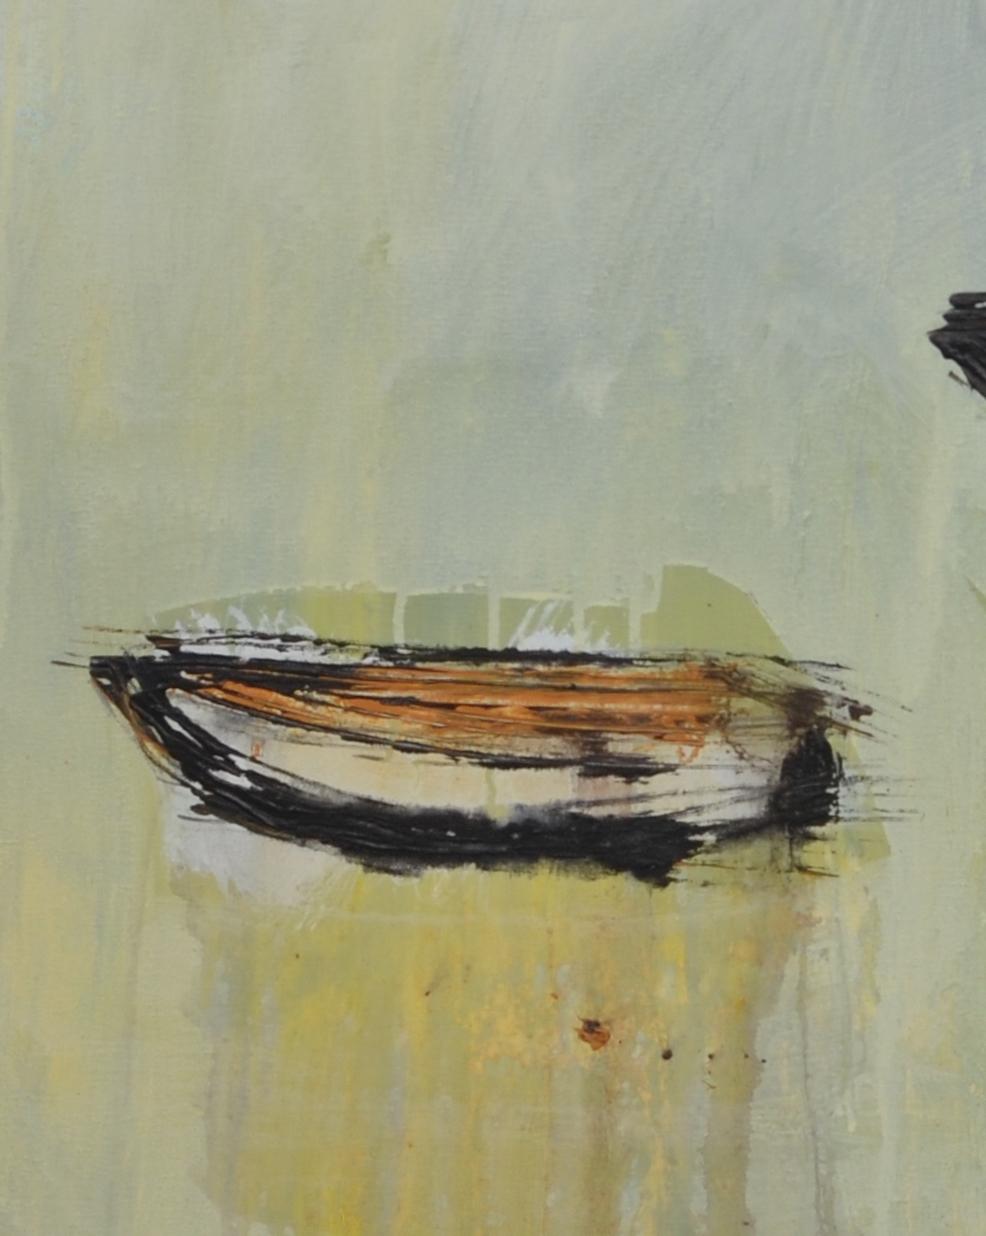 Patterson  Boats  Green  Golden acrylic painting - Neo-Expressionist Painting by PATTERSON, Yendris